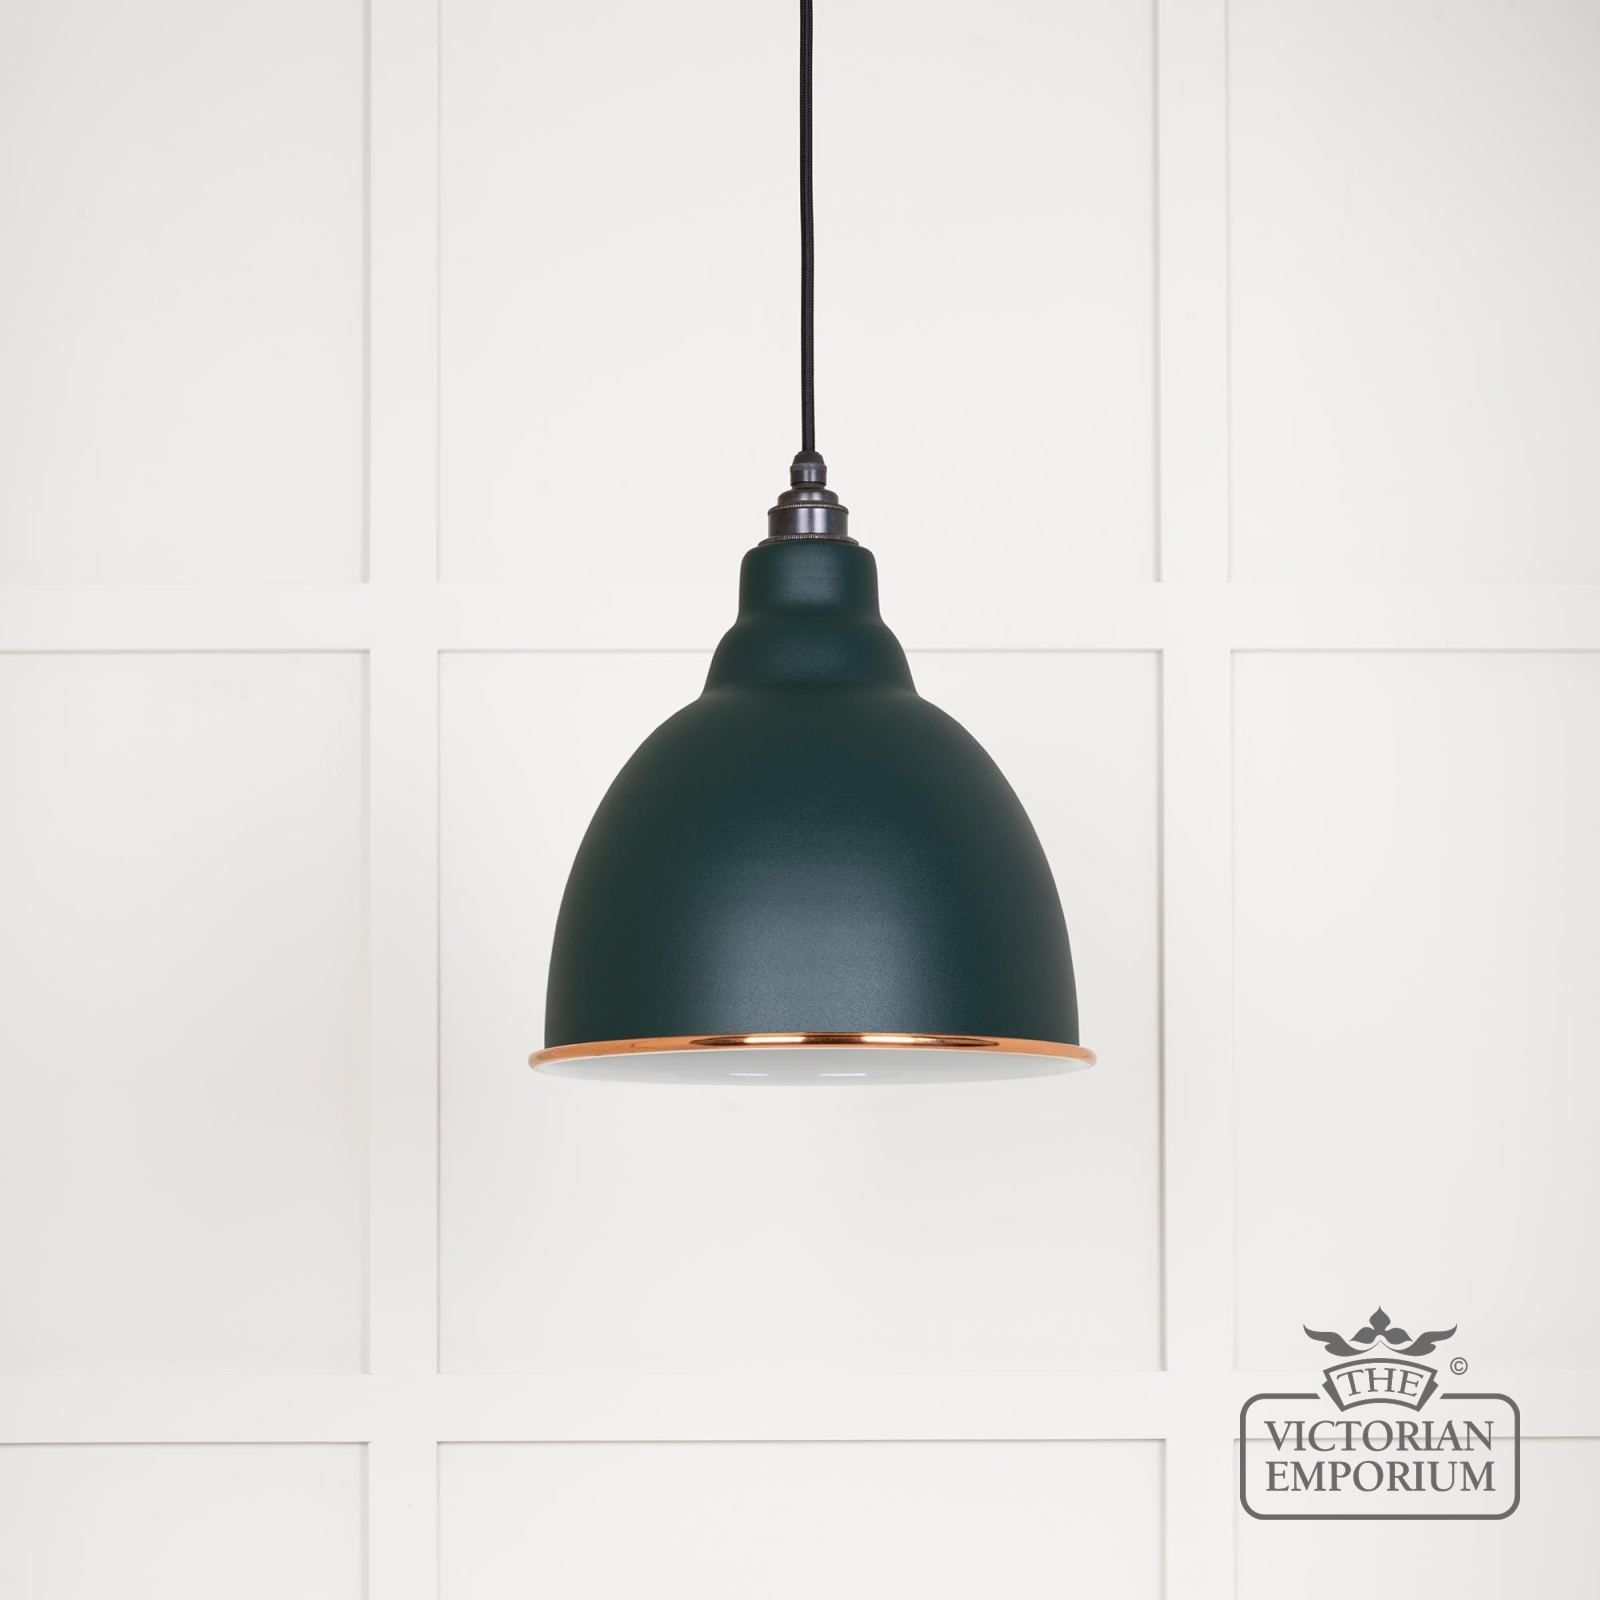 Brindle pendant light in Dingle with white gloss interior